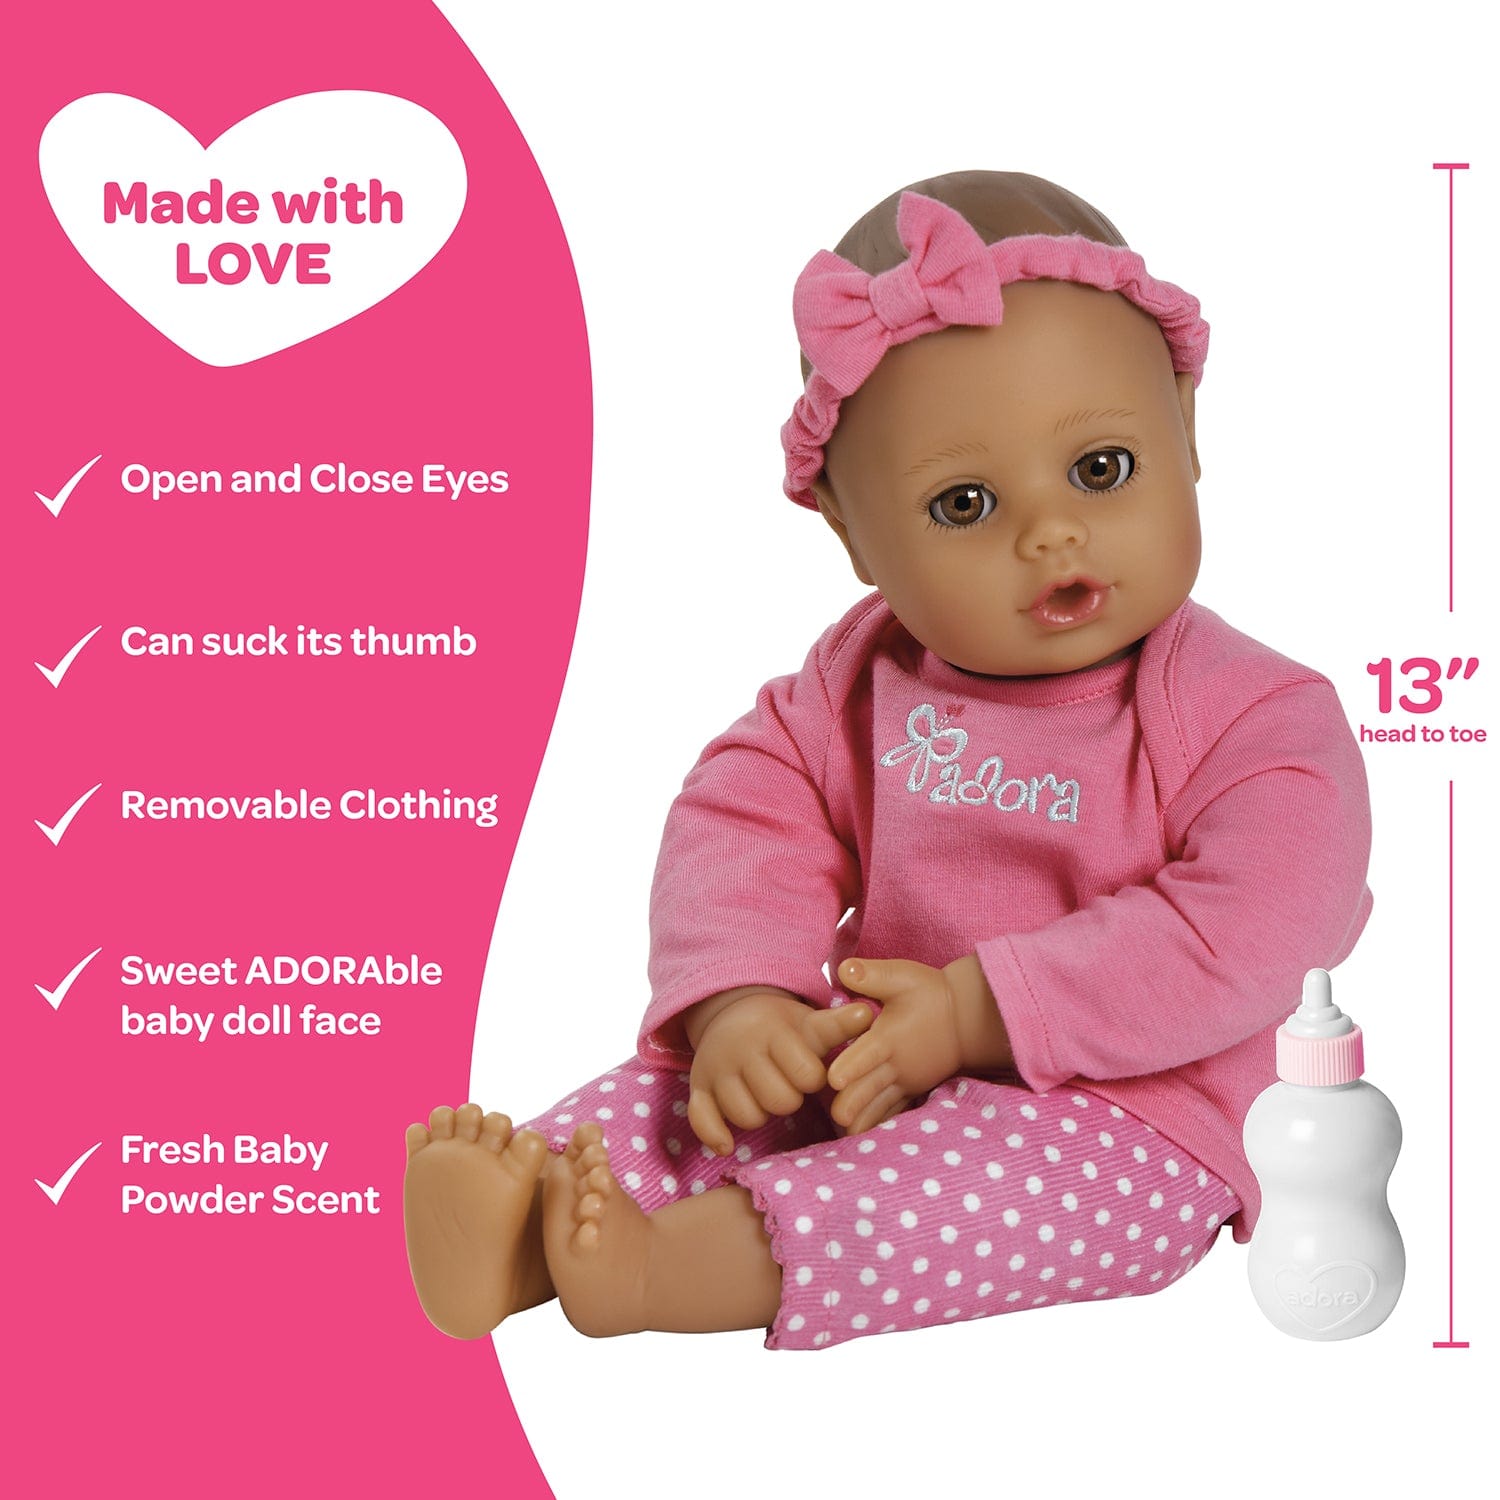 Adora PlayTime Baby Doll Pink, Baby Toy for 1 Year Old Girls